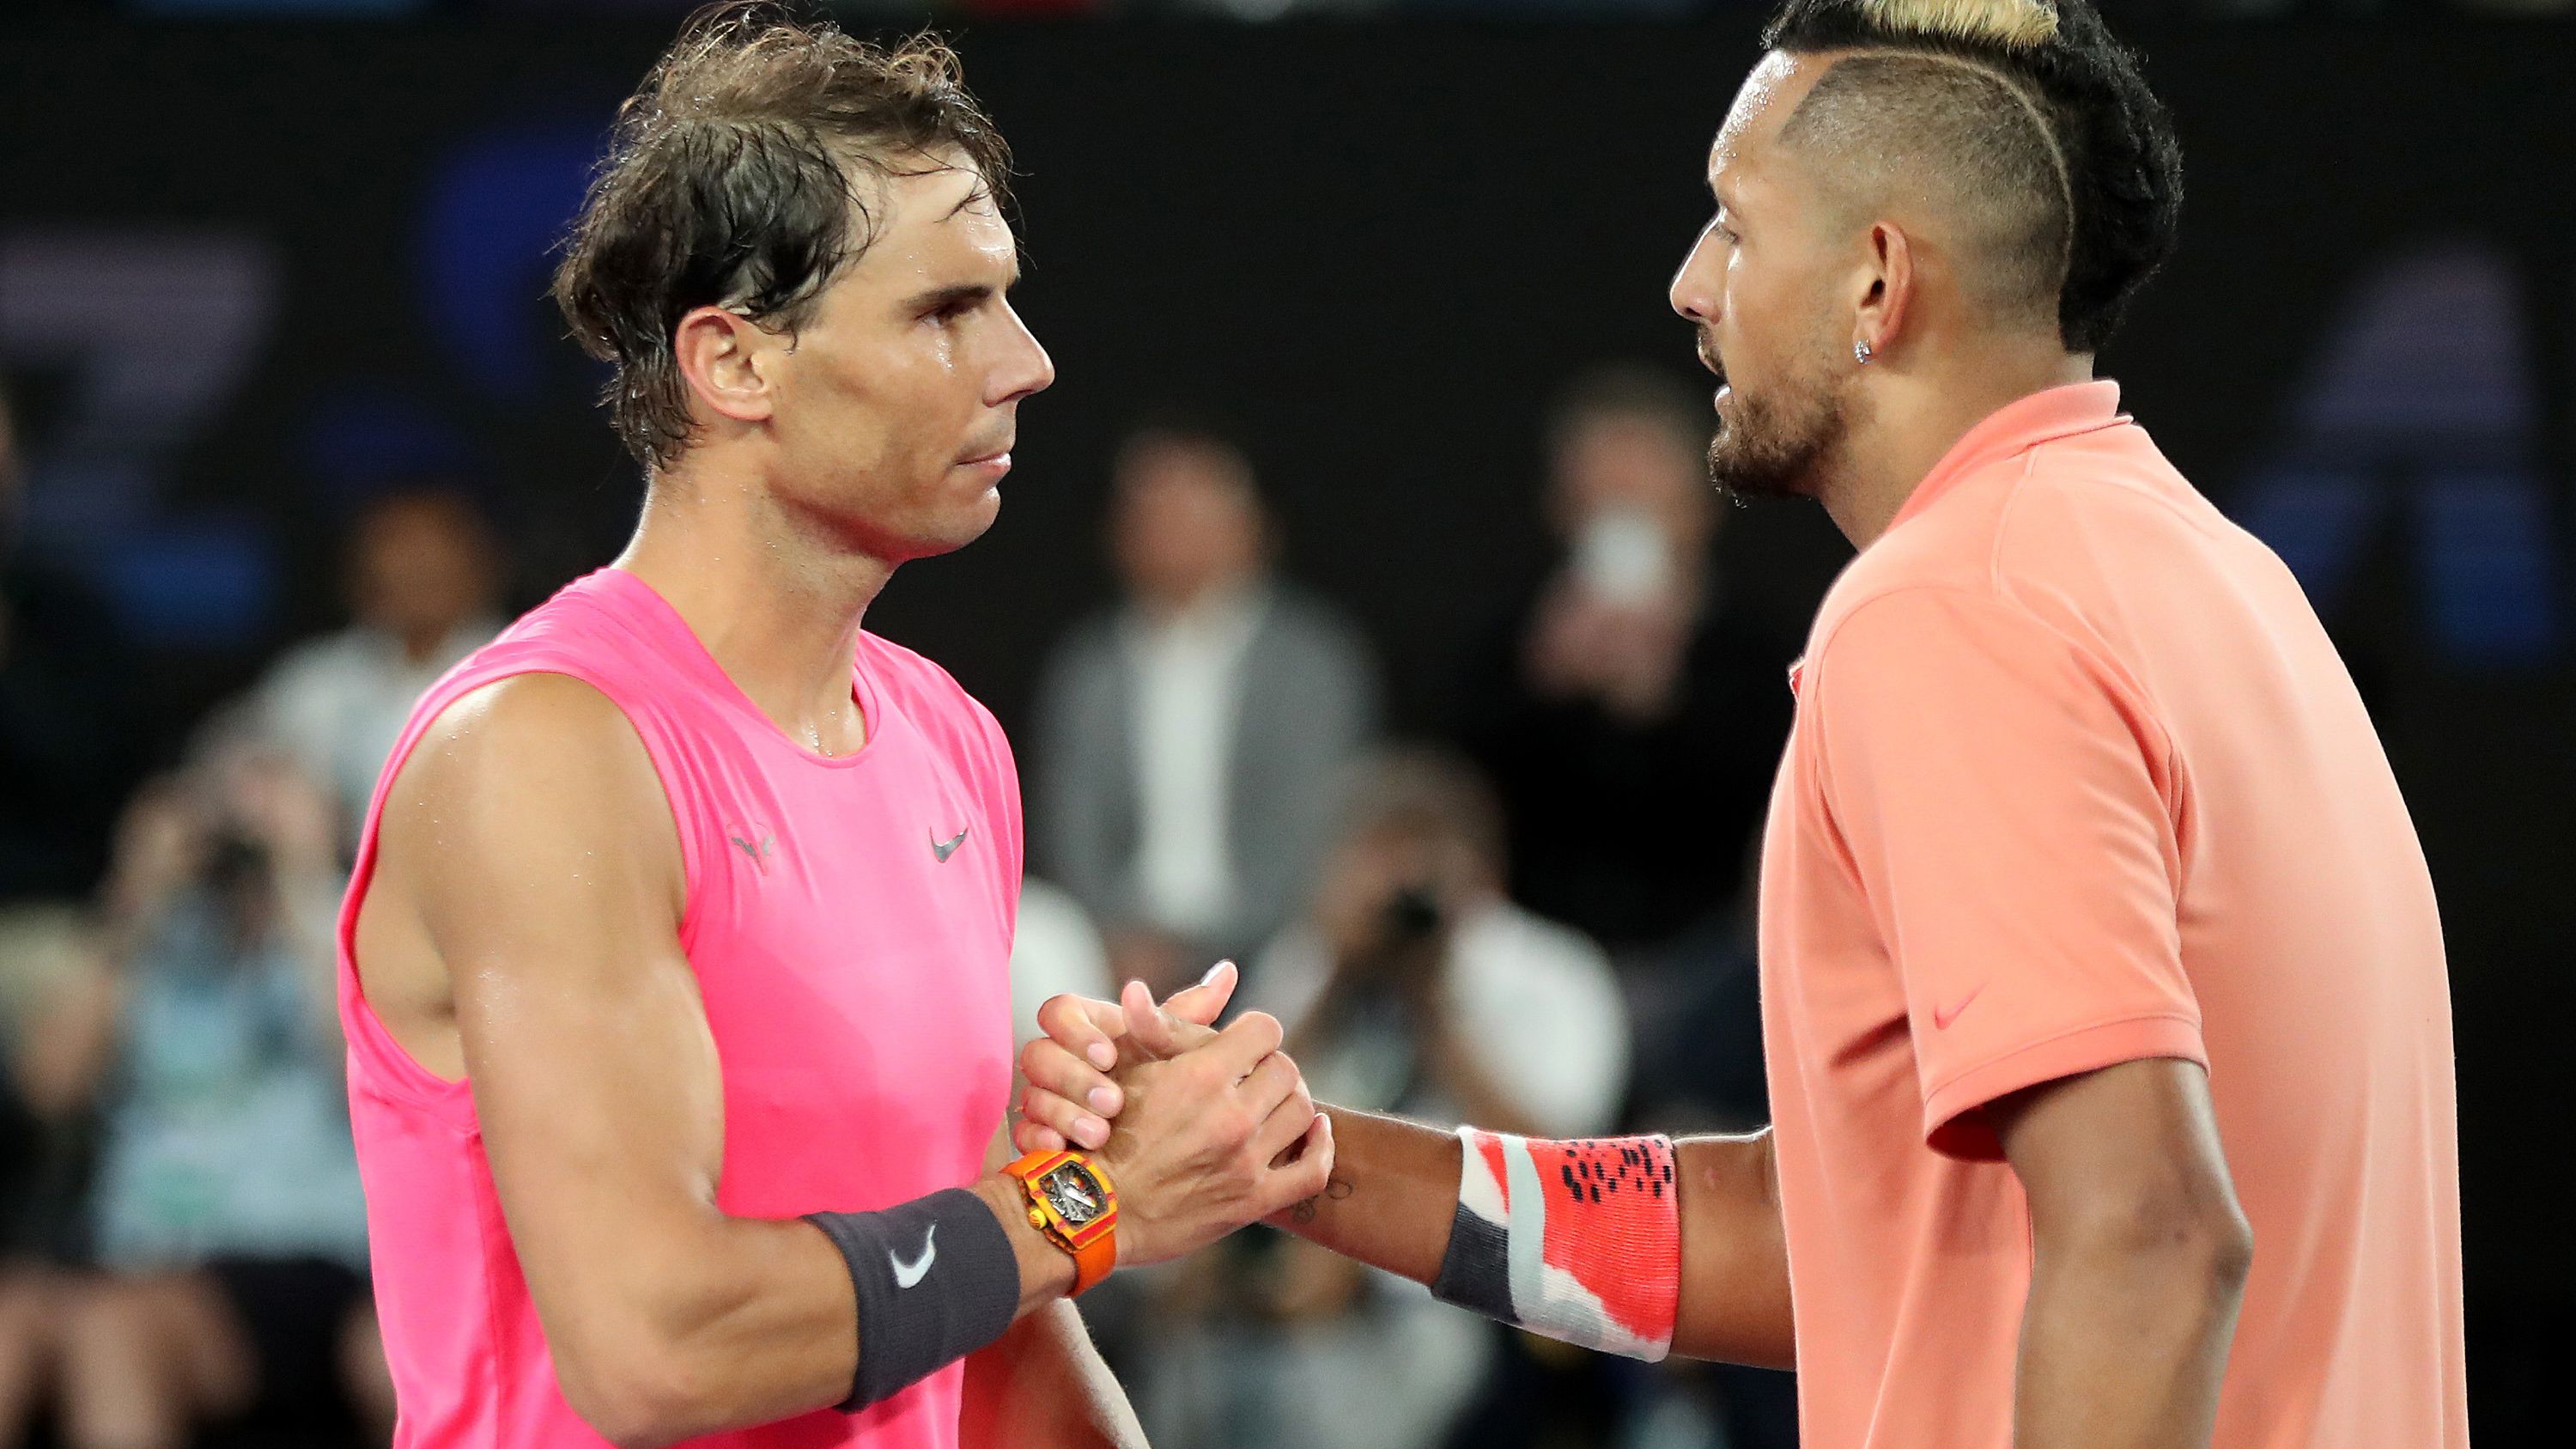 Nick Kyrgios shakes hands with Rafael Nadal at the 2020 Australian Open.